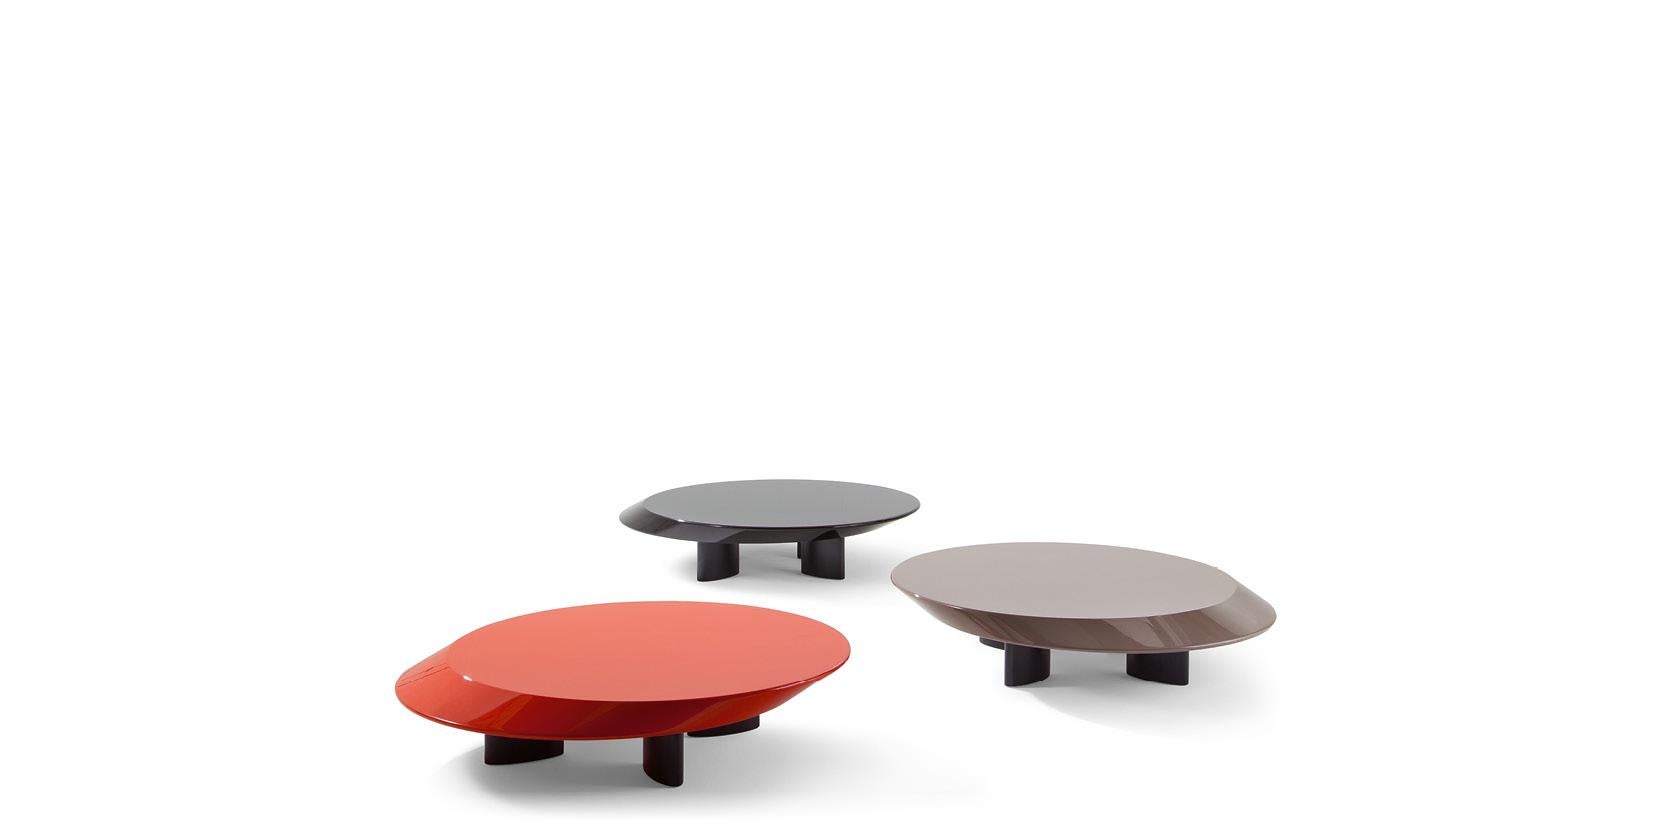 Low table designed by Charlotte Perriand in 1985. Relaunched by Cassina in 2009.
Manufactured by Cassina in Italy.

This low table, with its audacious sculptural look, was designed by Charlotte Perriand on the occasion of the retrospective